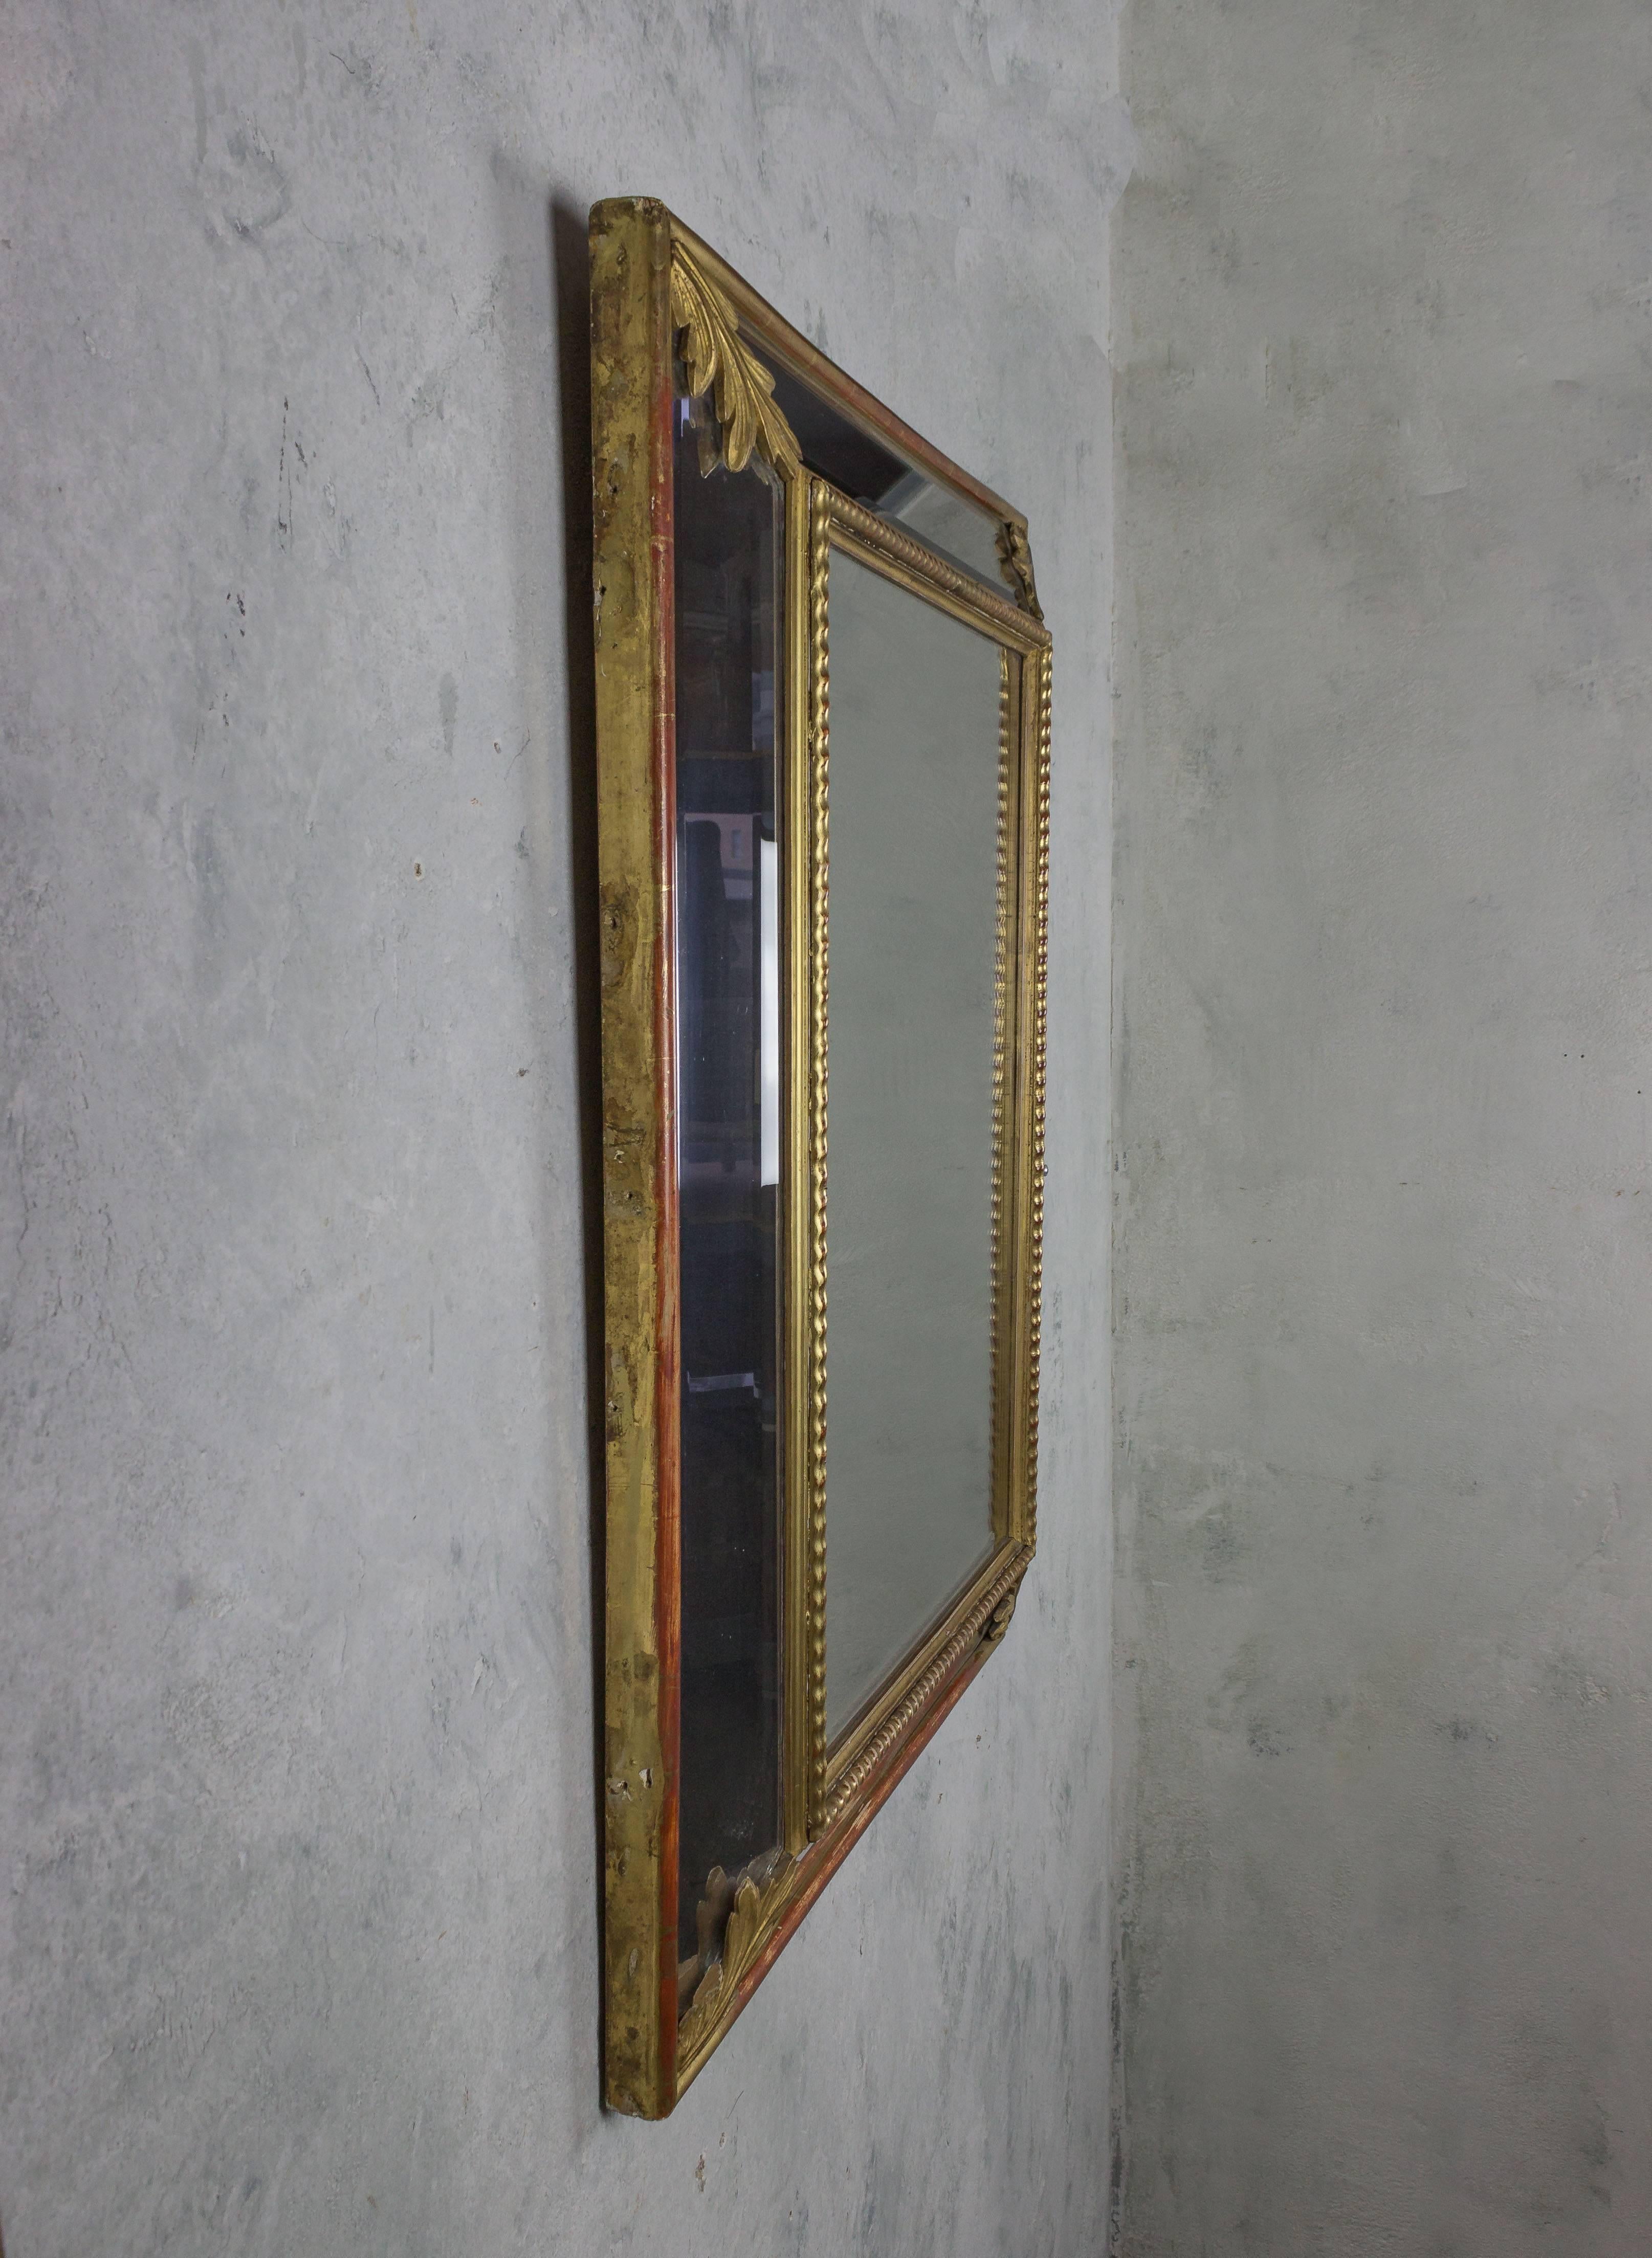 Neoclassical Revival French 19th Century Giltwood Beveled Mirror